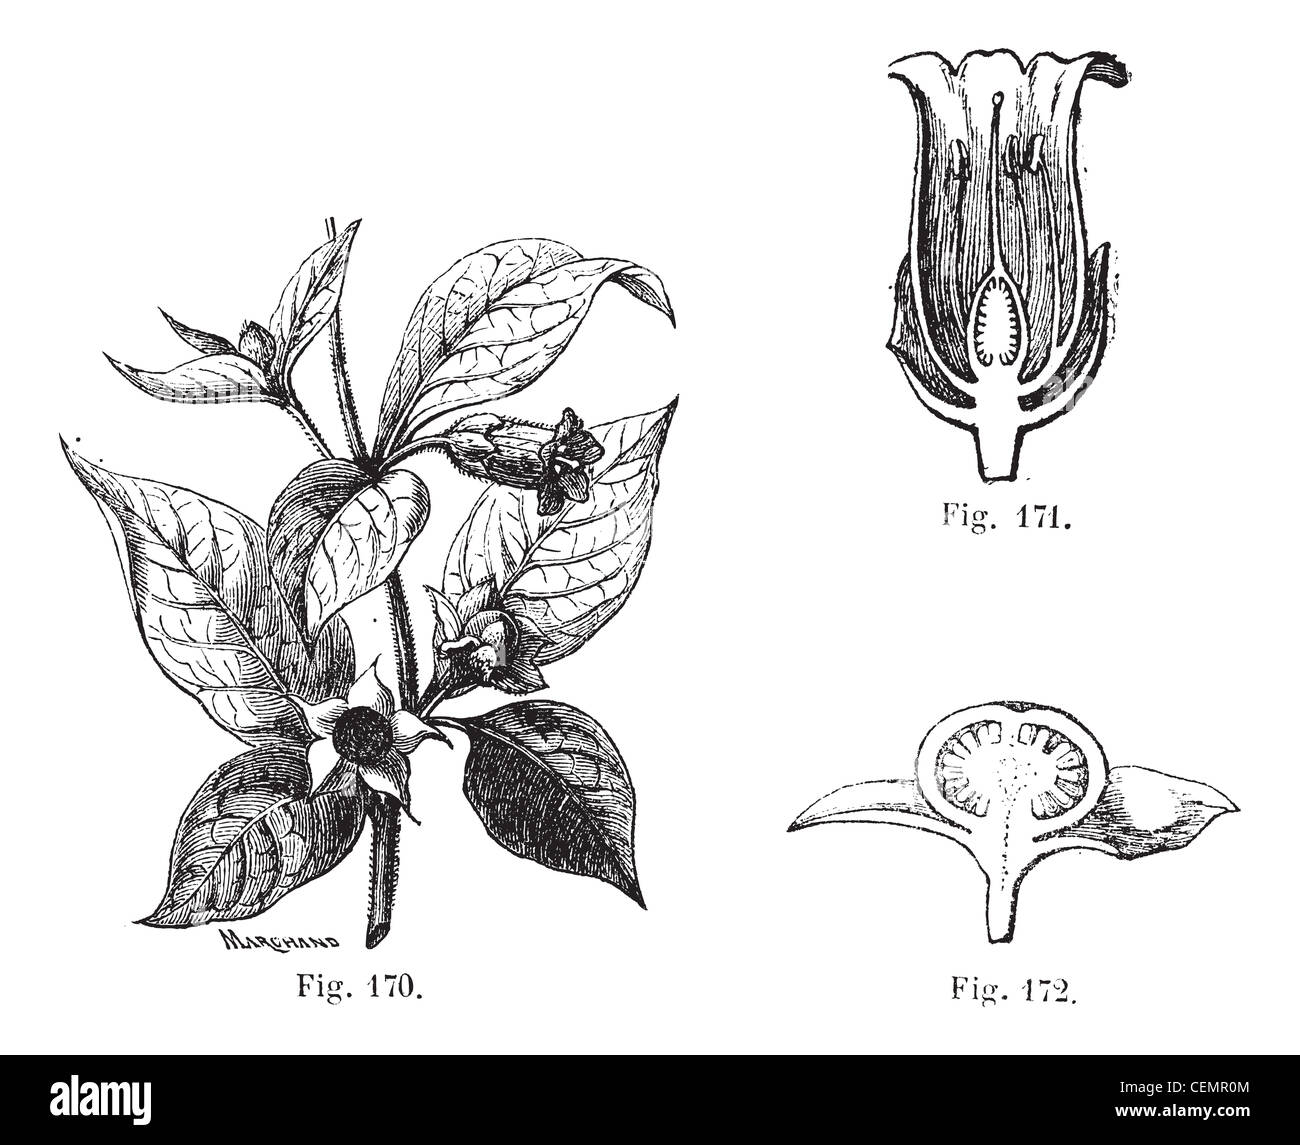 Fig. 170. Belladonna with its leaves, its flowers and fruits. Fig. 171. Cut flower of belladonna. Fig. 172. Cutting the fruit of belladonna, vintage engraved illustration. Atropa belladonna or Atropa bella-donna or Devil's Berries or Death Cherries or Deadly Nightshade. Magasin Pittoresque 1875. Stock Photo